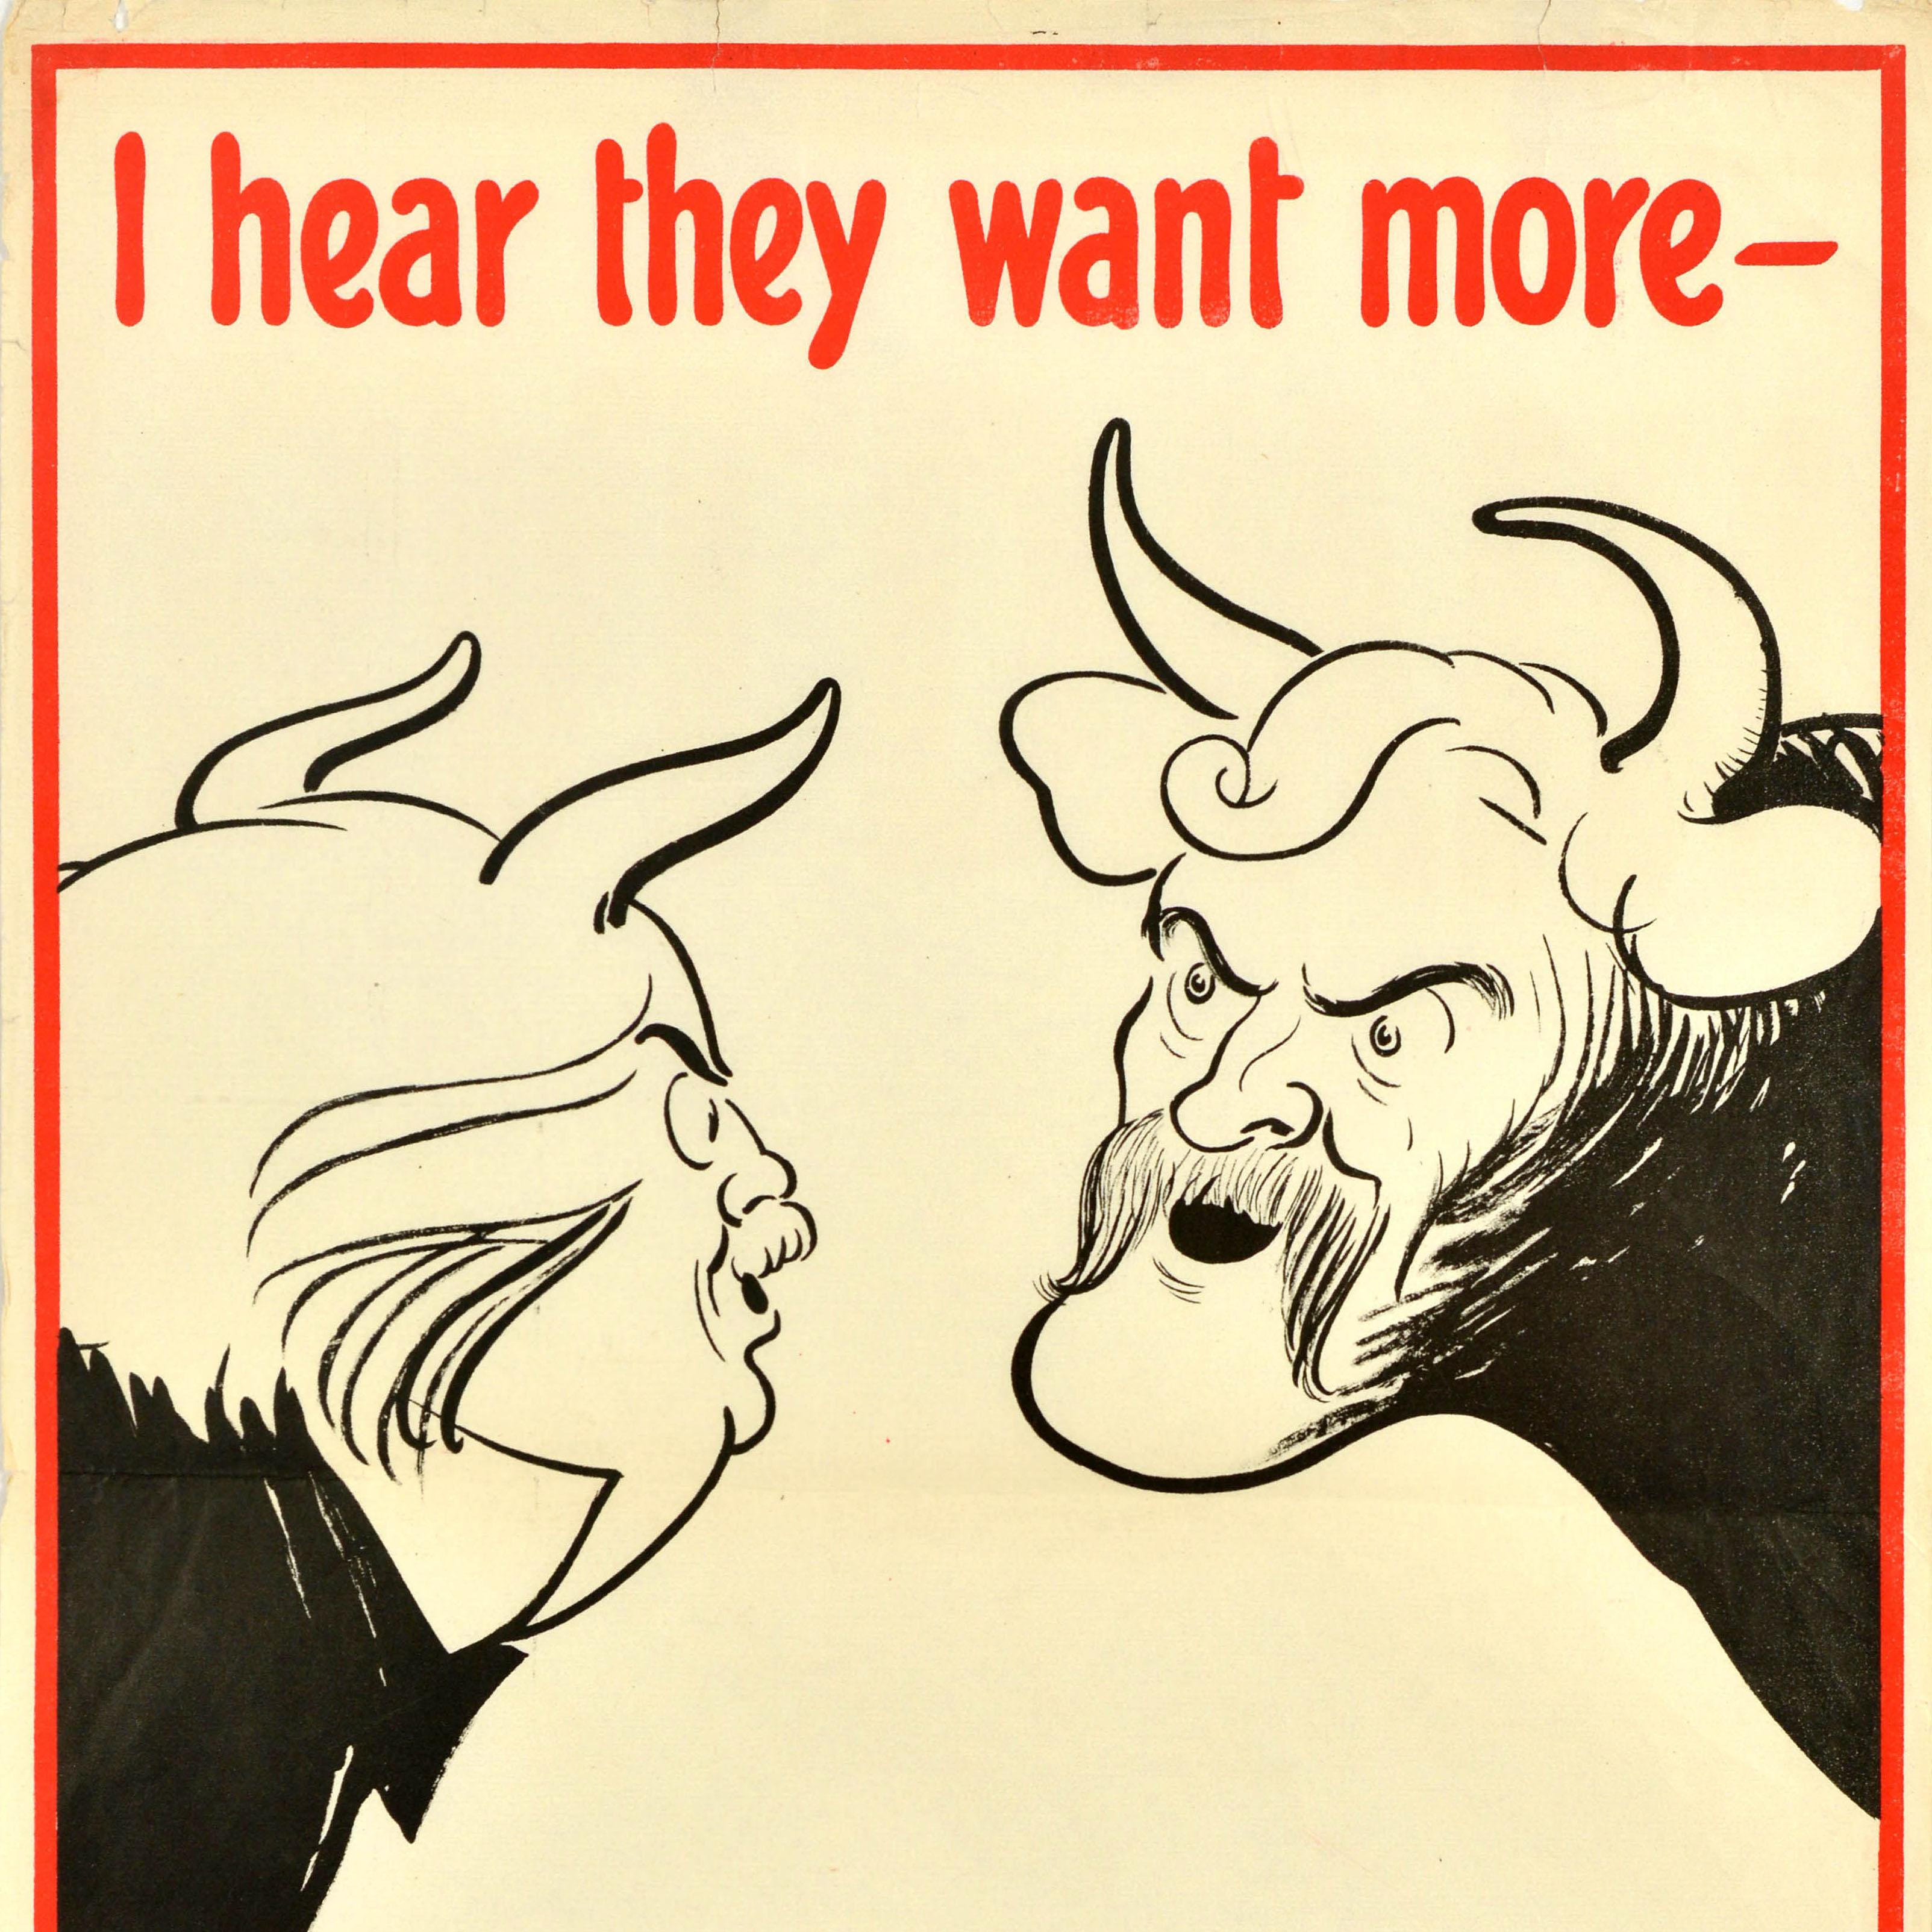 Original vintage political propaganda poster - I hear they want more - Baldwin (With Apologies to Bovril Ltd.). Design by the notable artist John Gilroy (John Thomas Young Gilroy; 1898-1985) in the style of the Bovril posters of the time, set in a